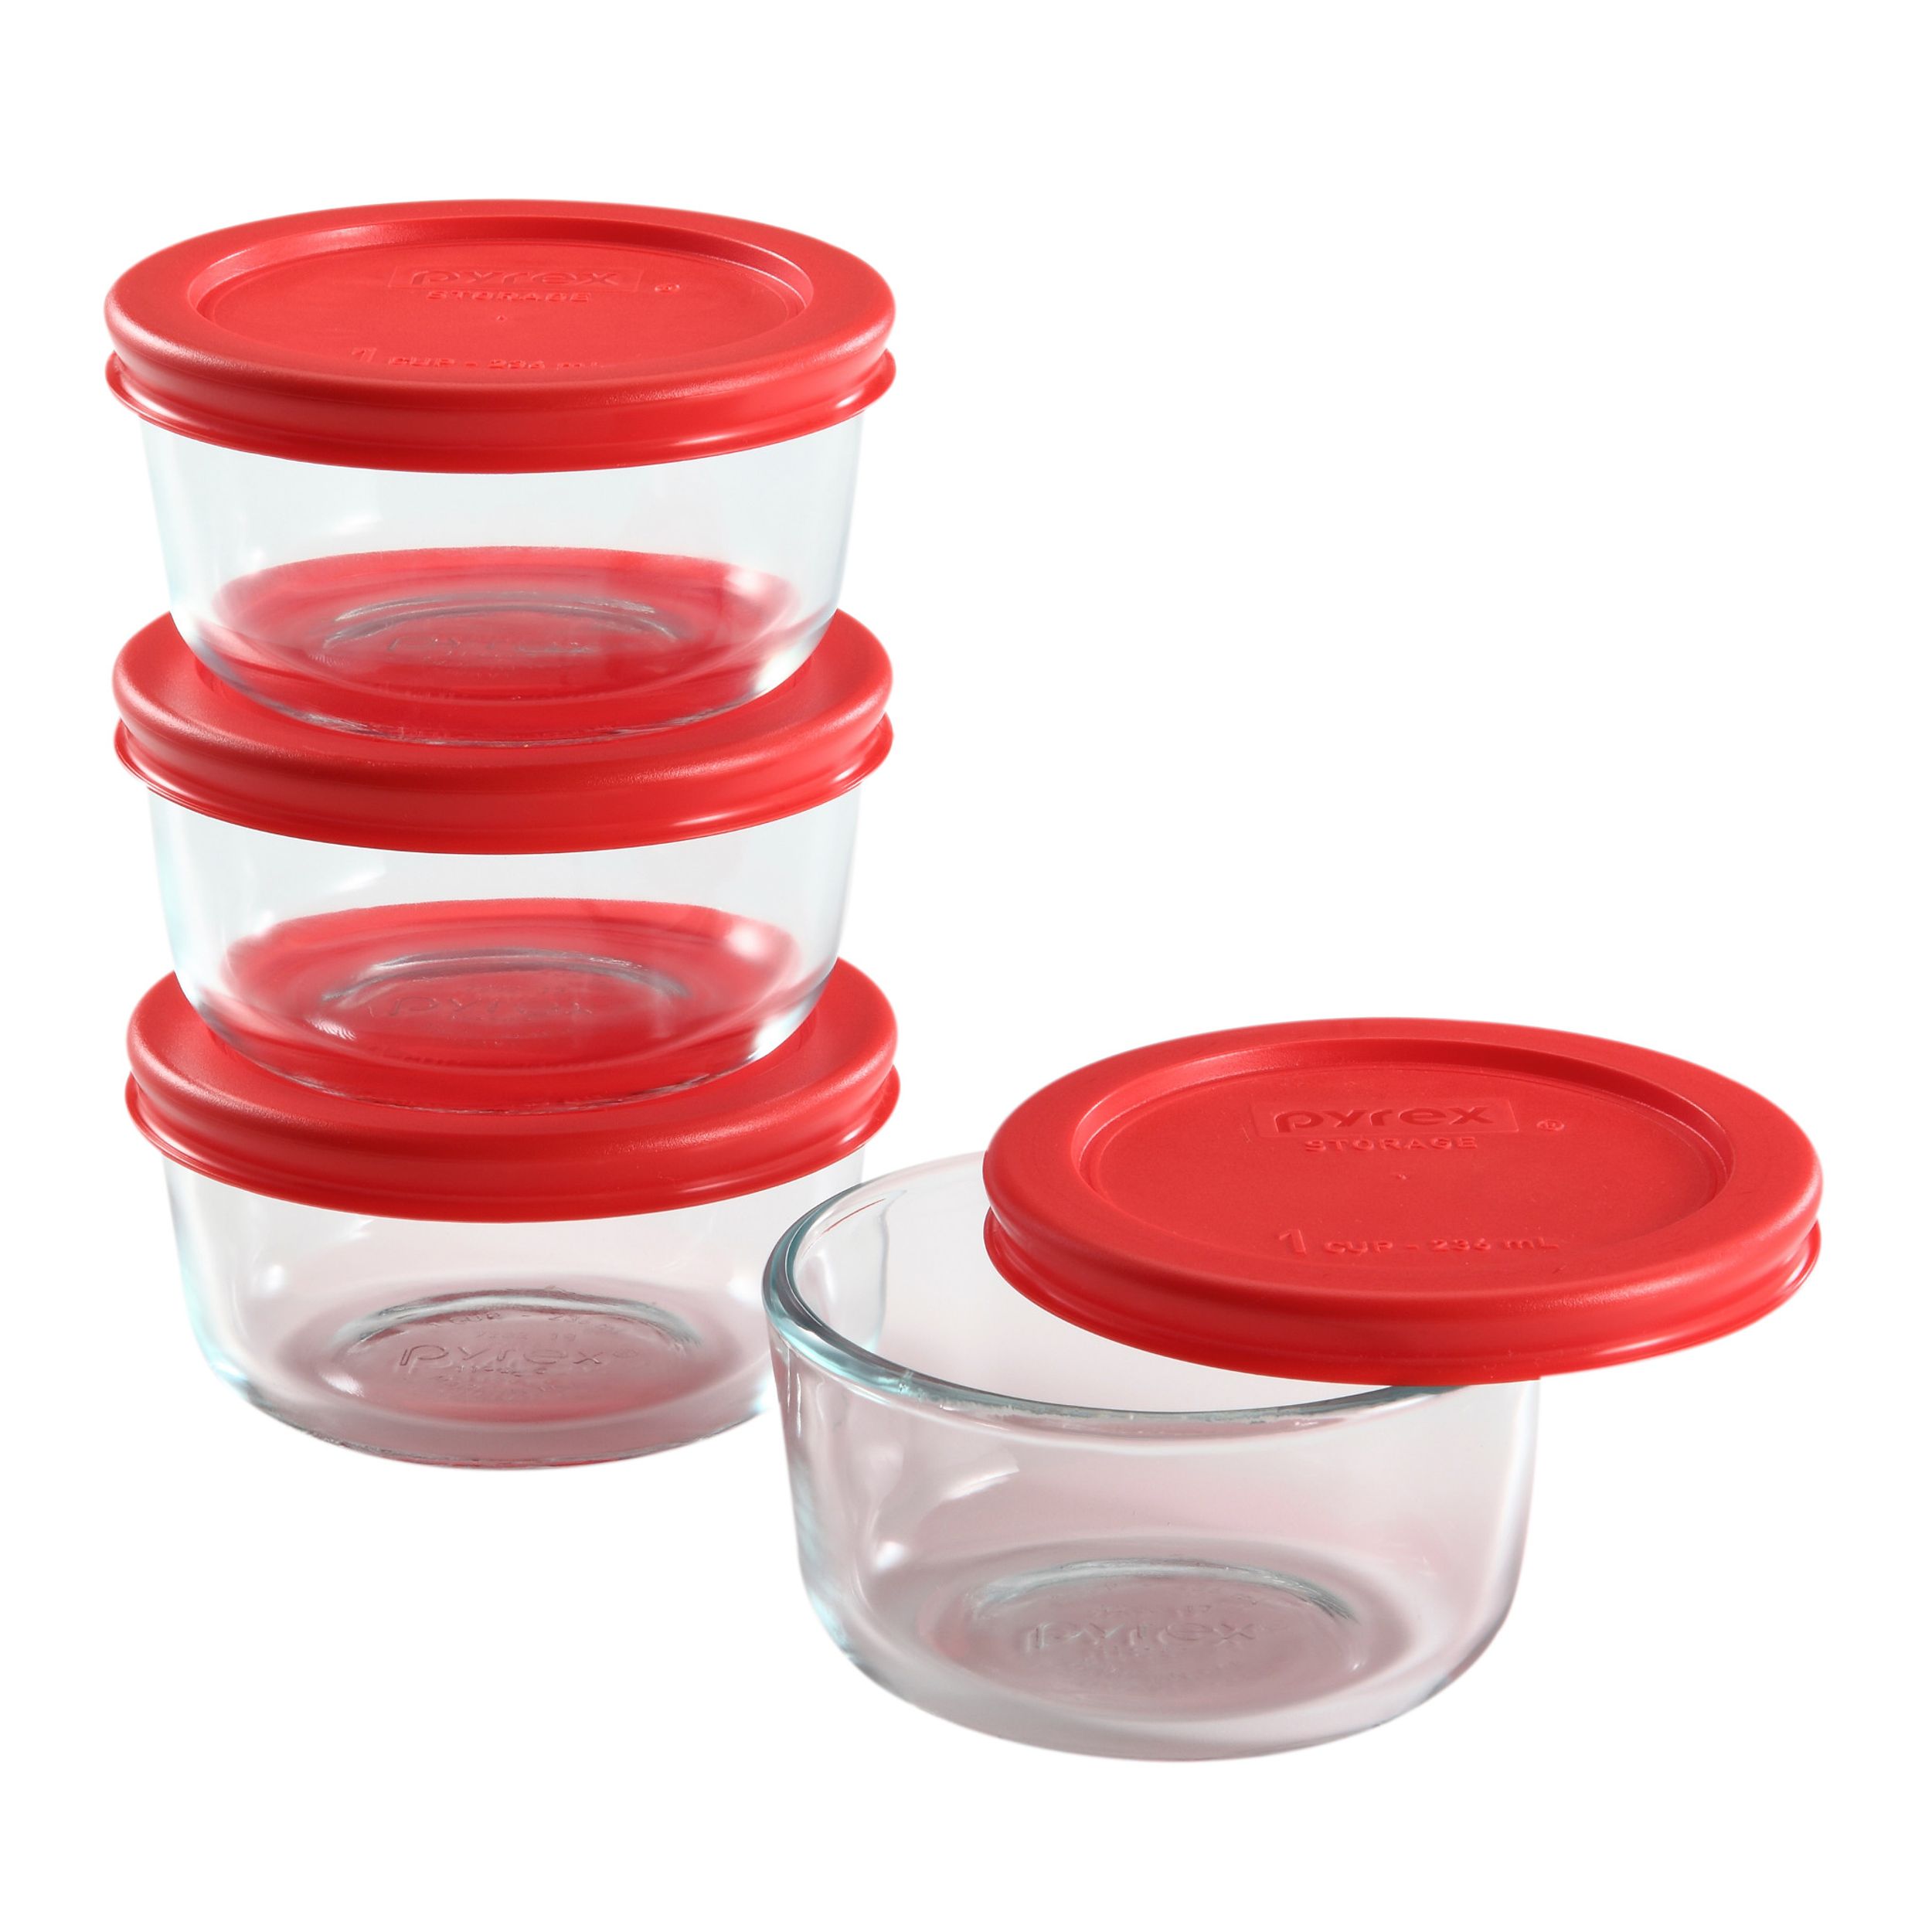 Glad FreezerWare Food Storage Containers, Large - 2 pack